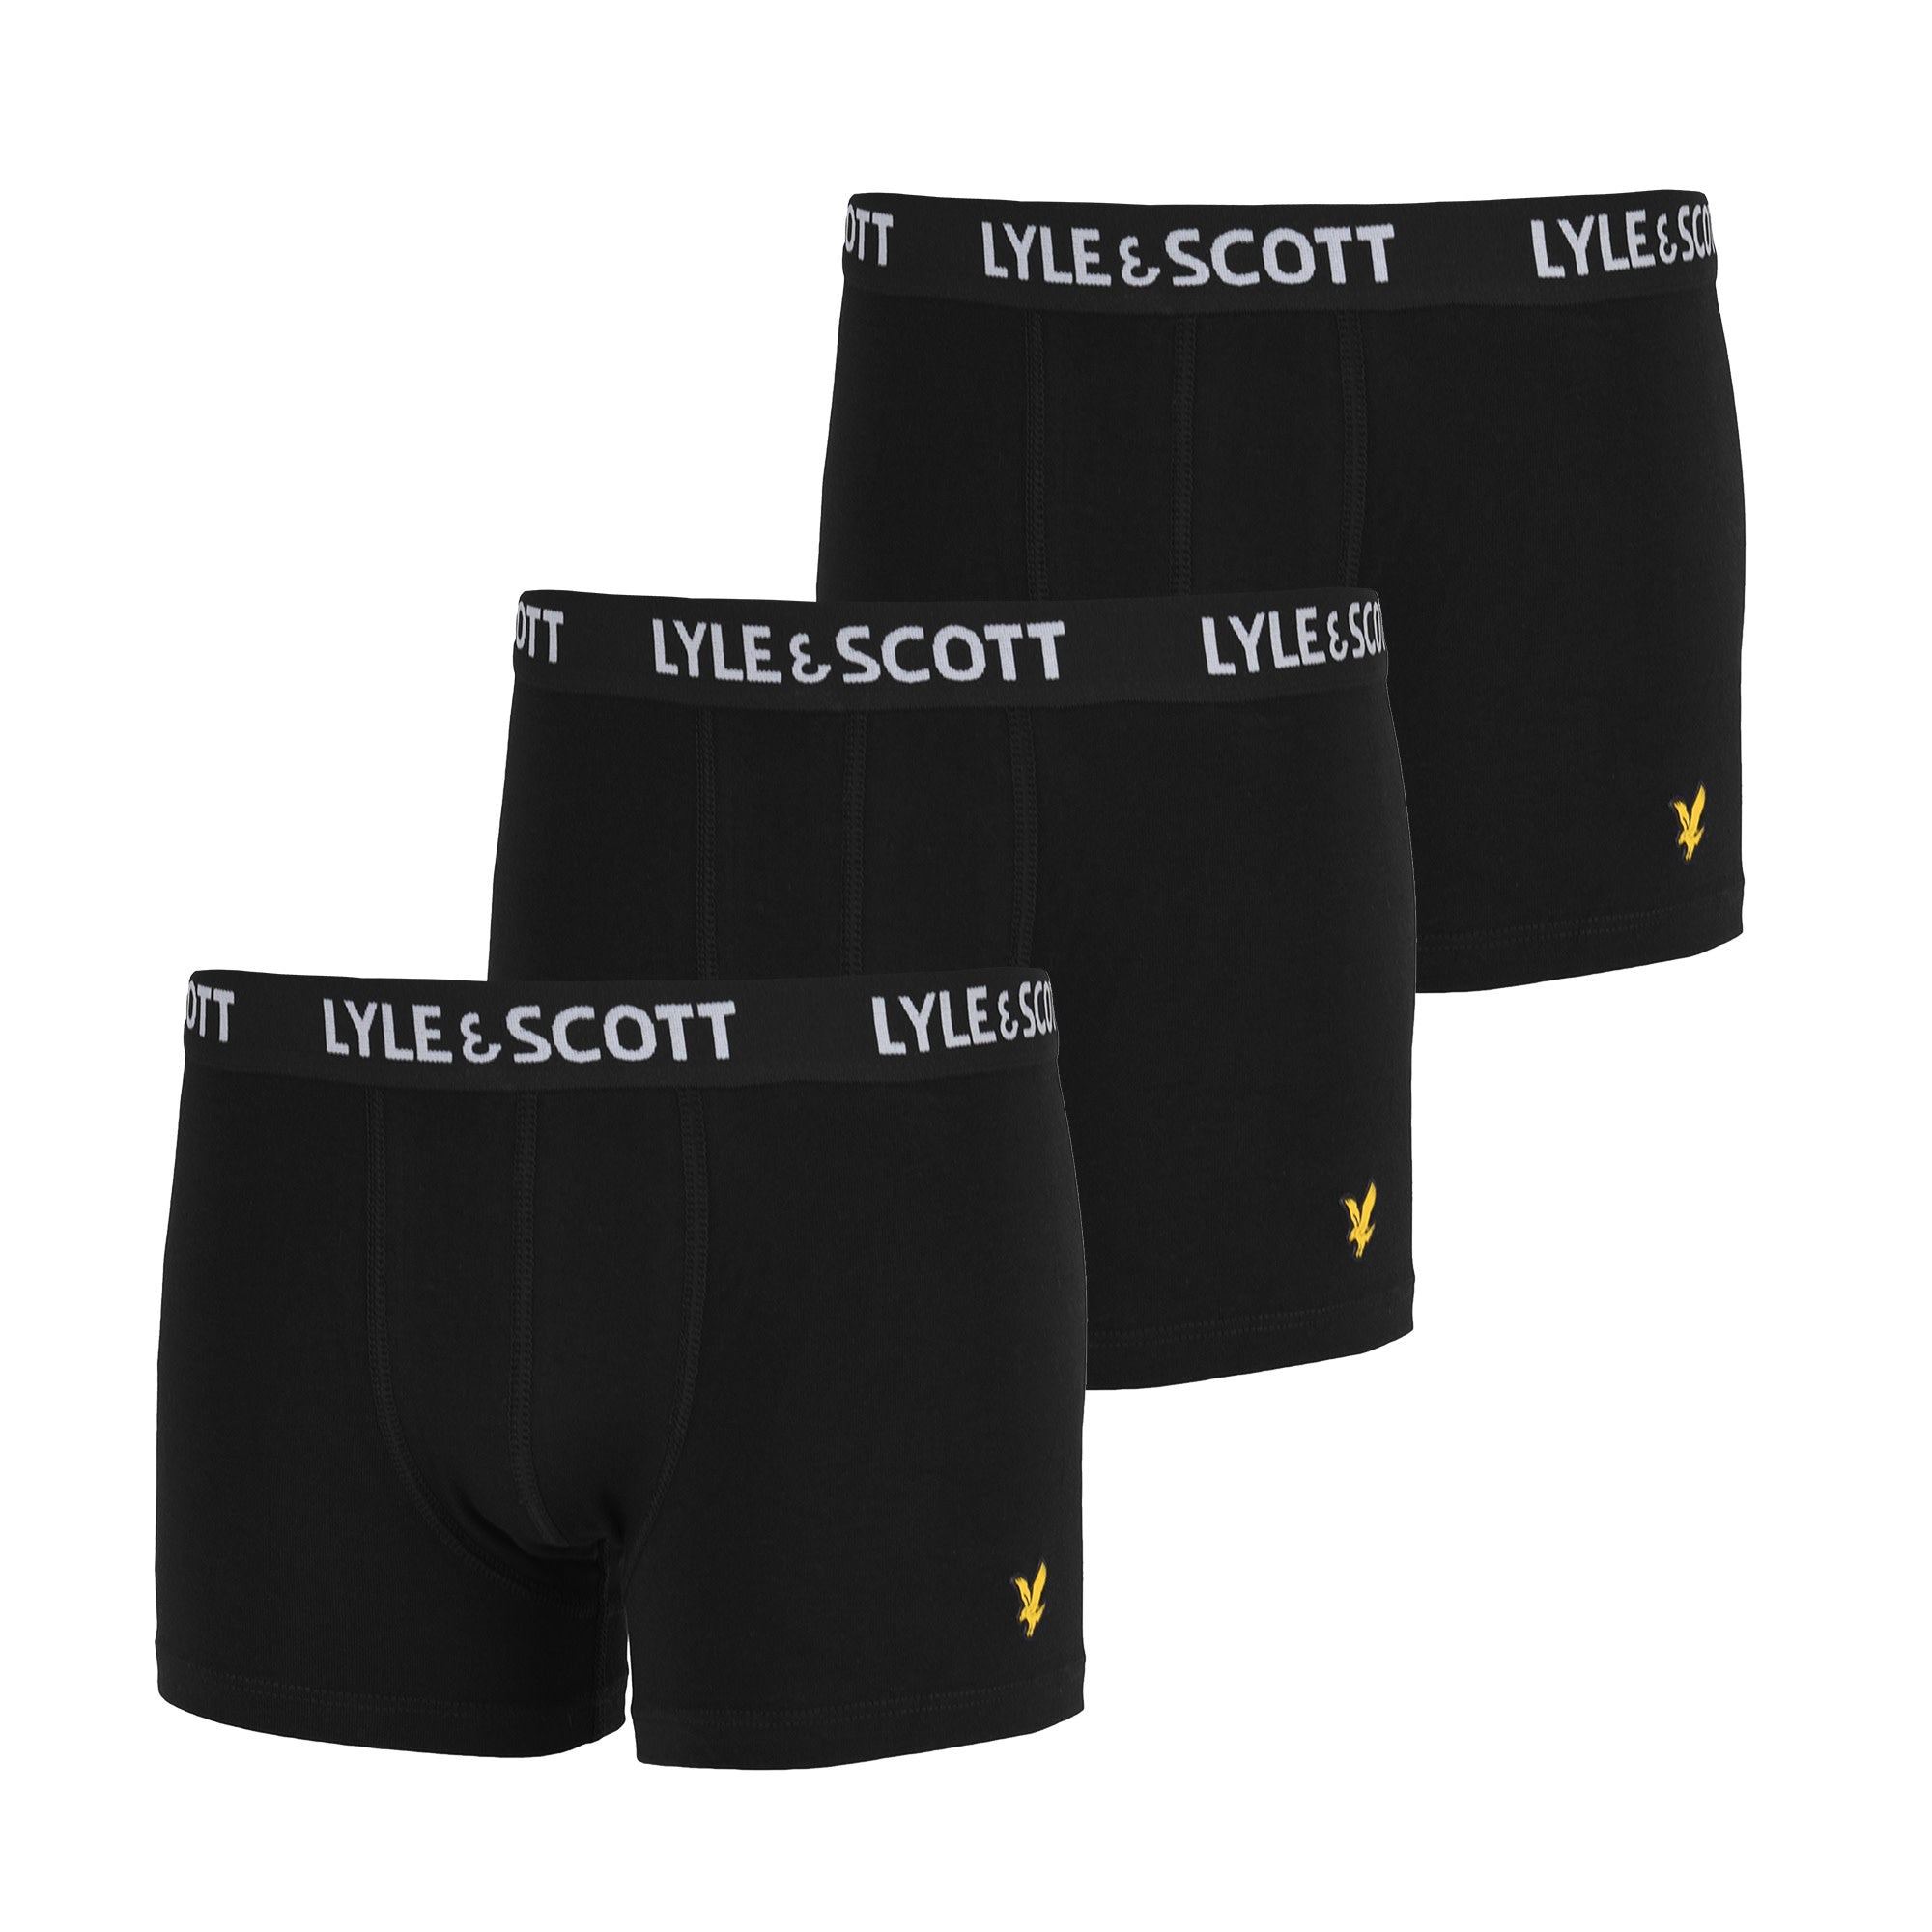 Lyle & Scott Boxed Solid 3 Pair Boxers Ratio Pack Teen Black